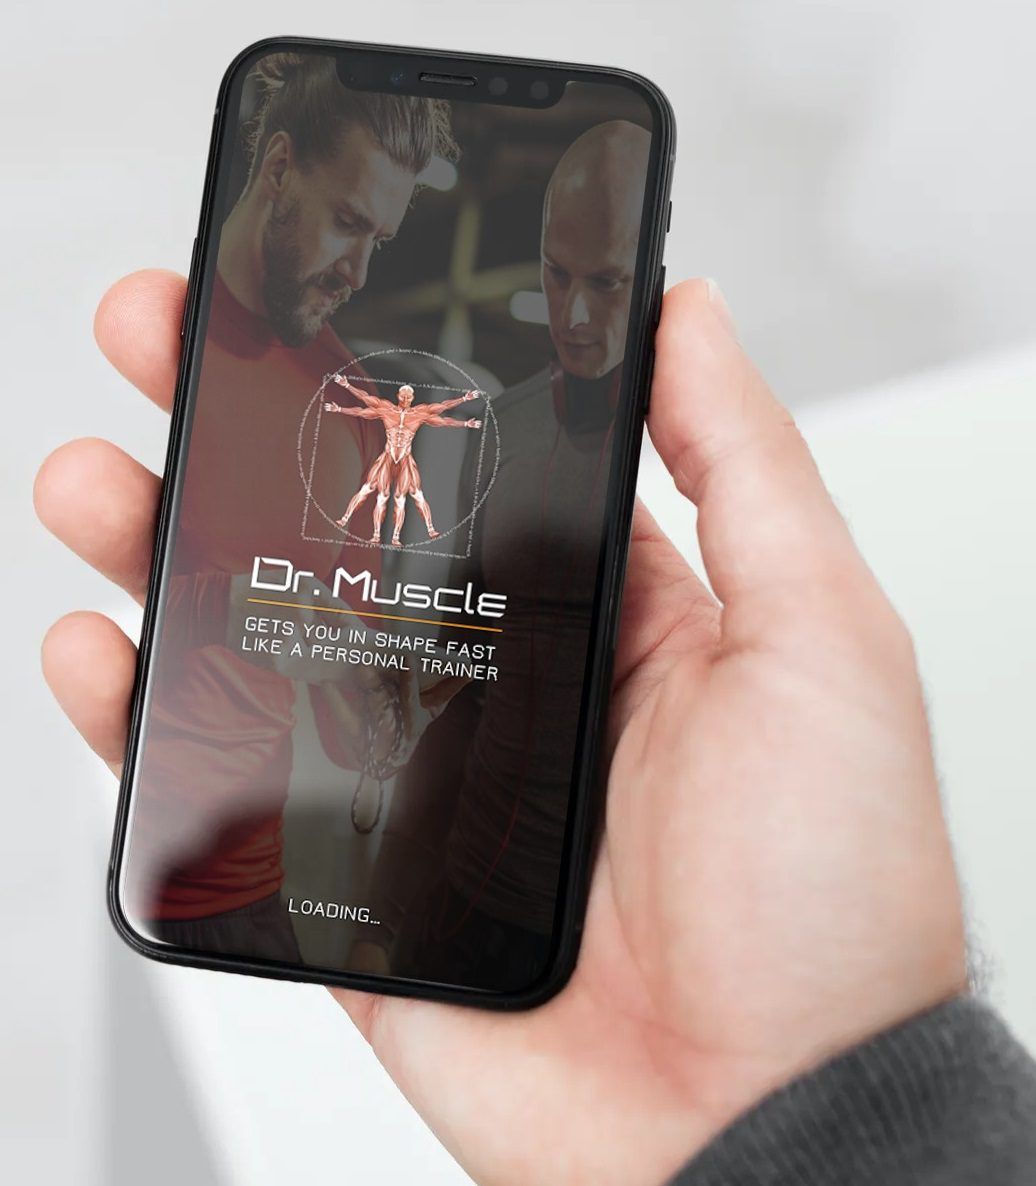 Introducing Dr. Muscle: The World's First AI Personal Trainer